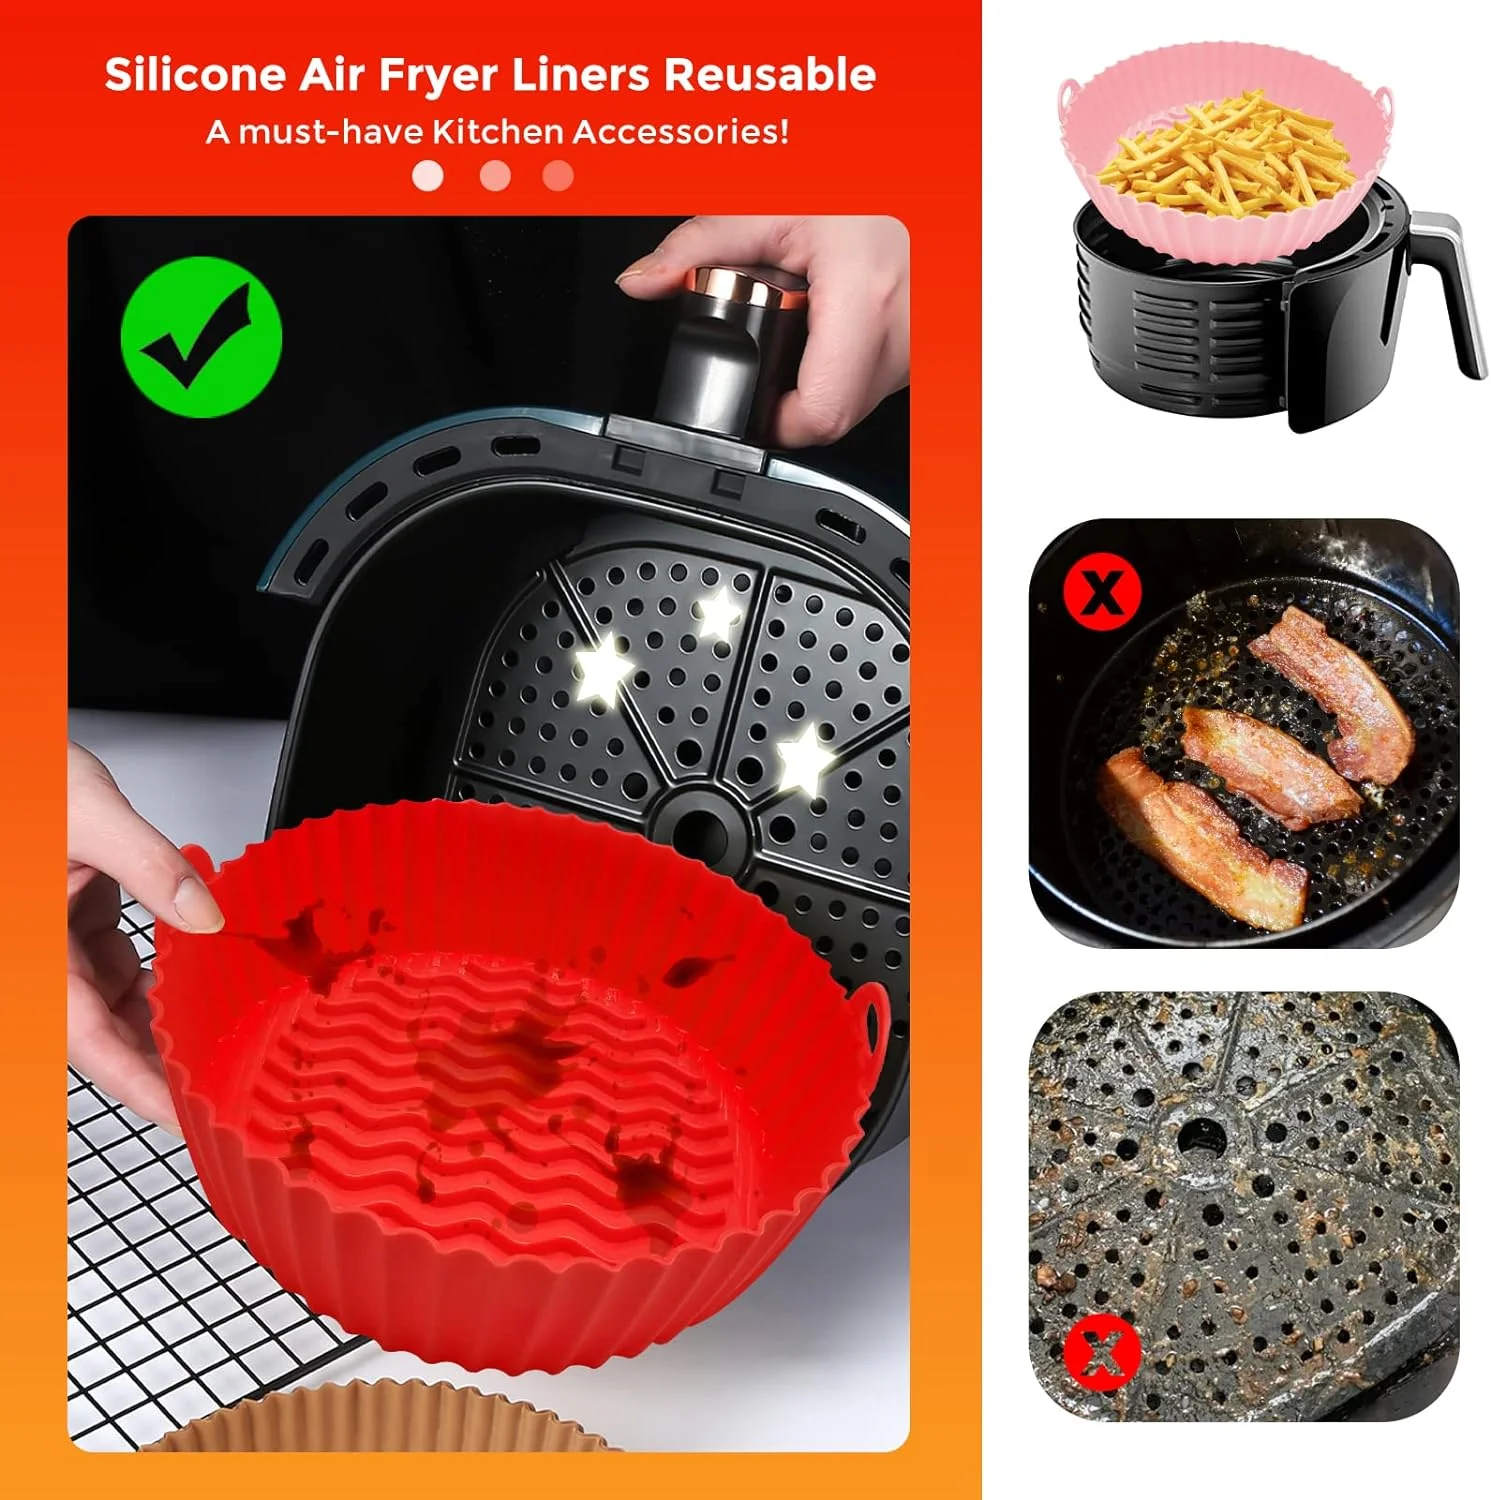 Silicone Air Fryer Liners Review